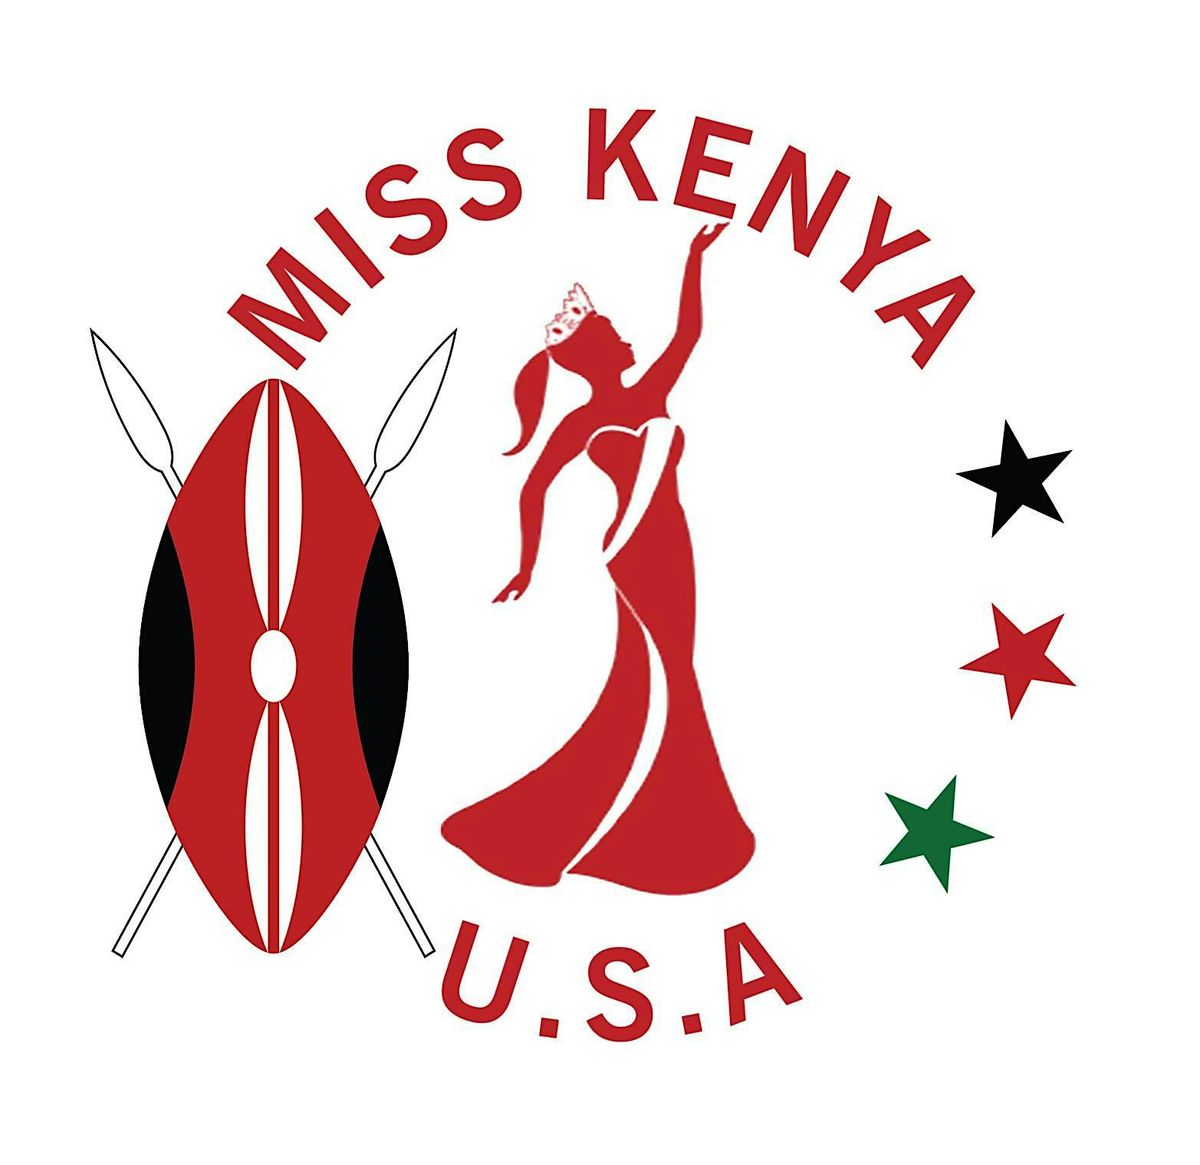 Welcome to the Annual Miss Kenya USA Pageant